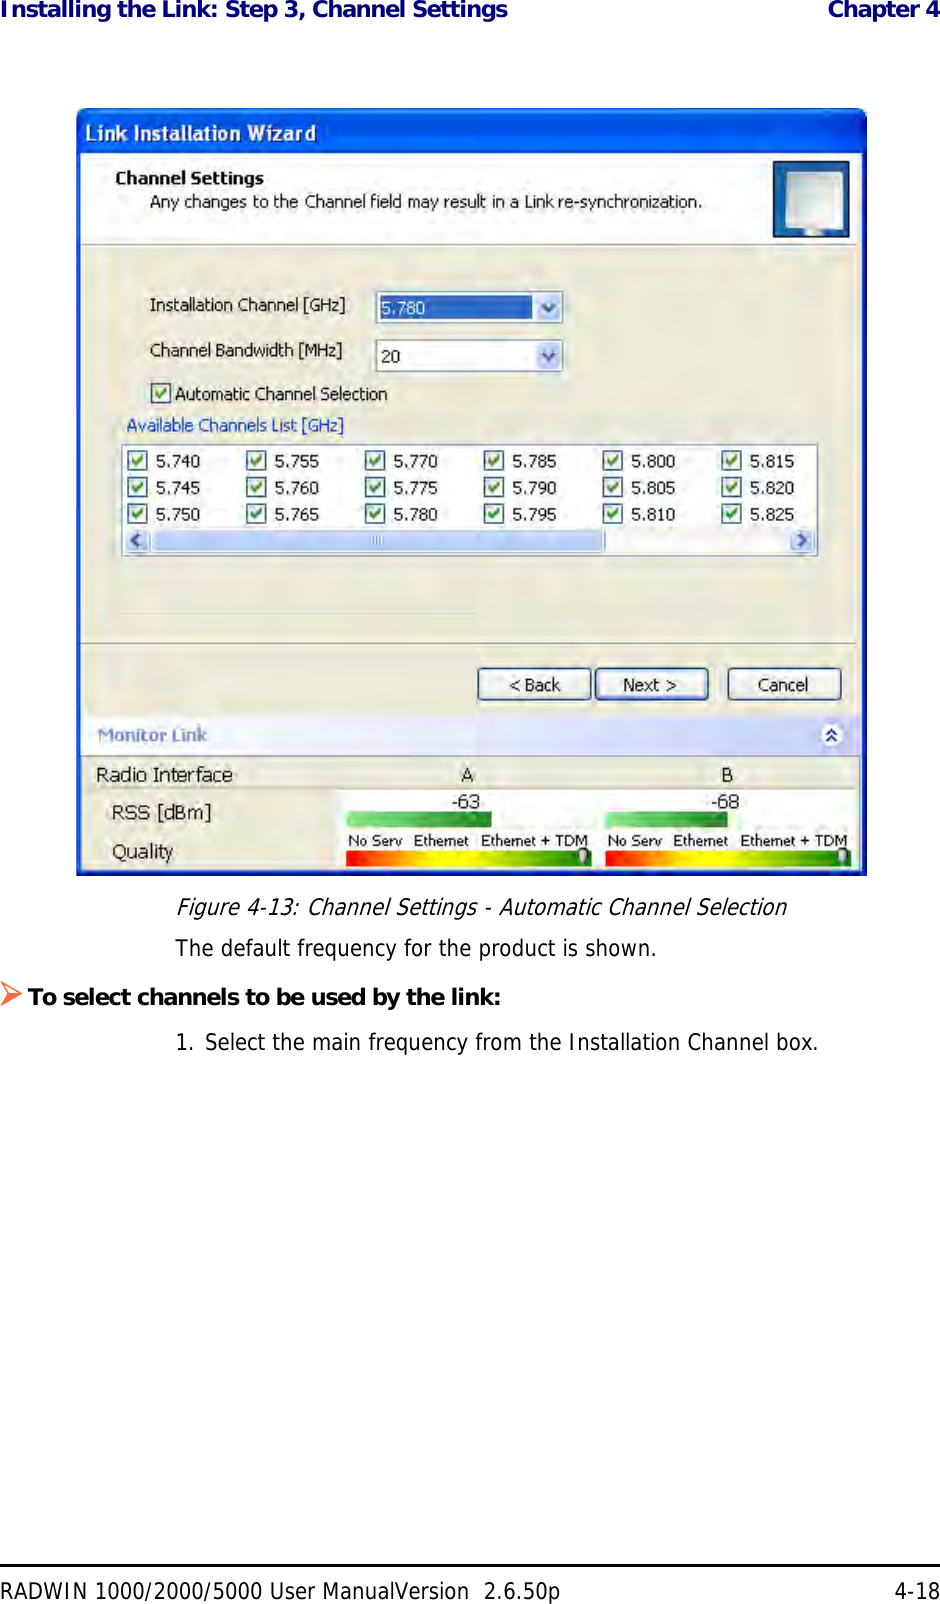 Installing the Link: Step 3, Channel Settings  Chapter 4RADWIN 1000/2000/5000 User ManualVersion  2.6.50p 4-18Figure 4-13: Channel Settings - Automatic Channel SelectionThe default frequency for the product is shown.To select channels to be used by the link:1. Select the main frequency from the Installation Channel box.